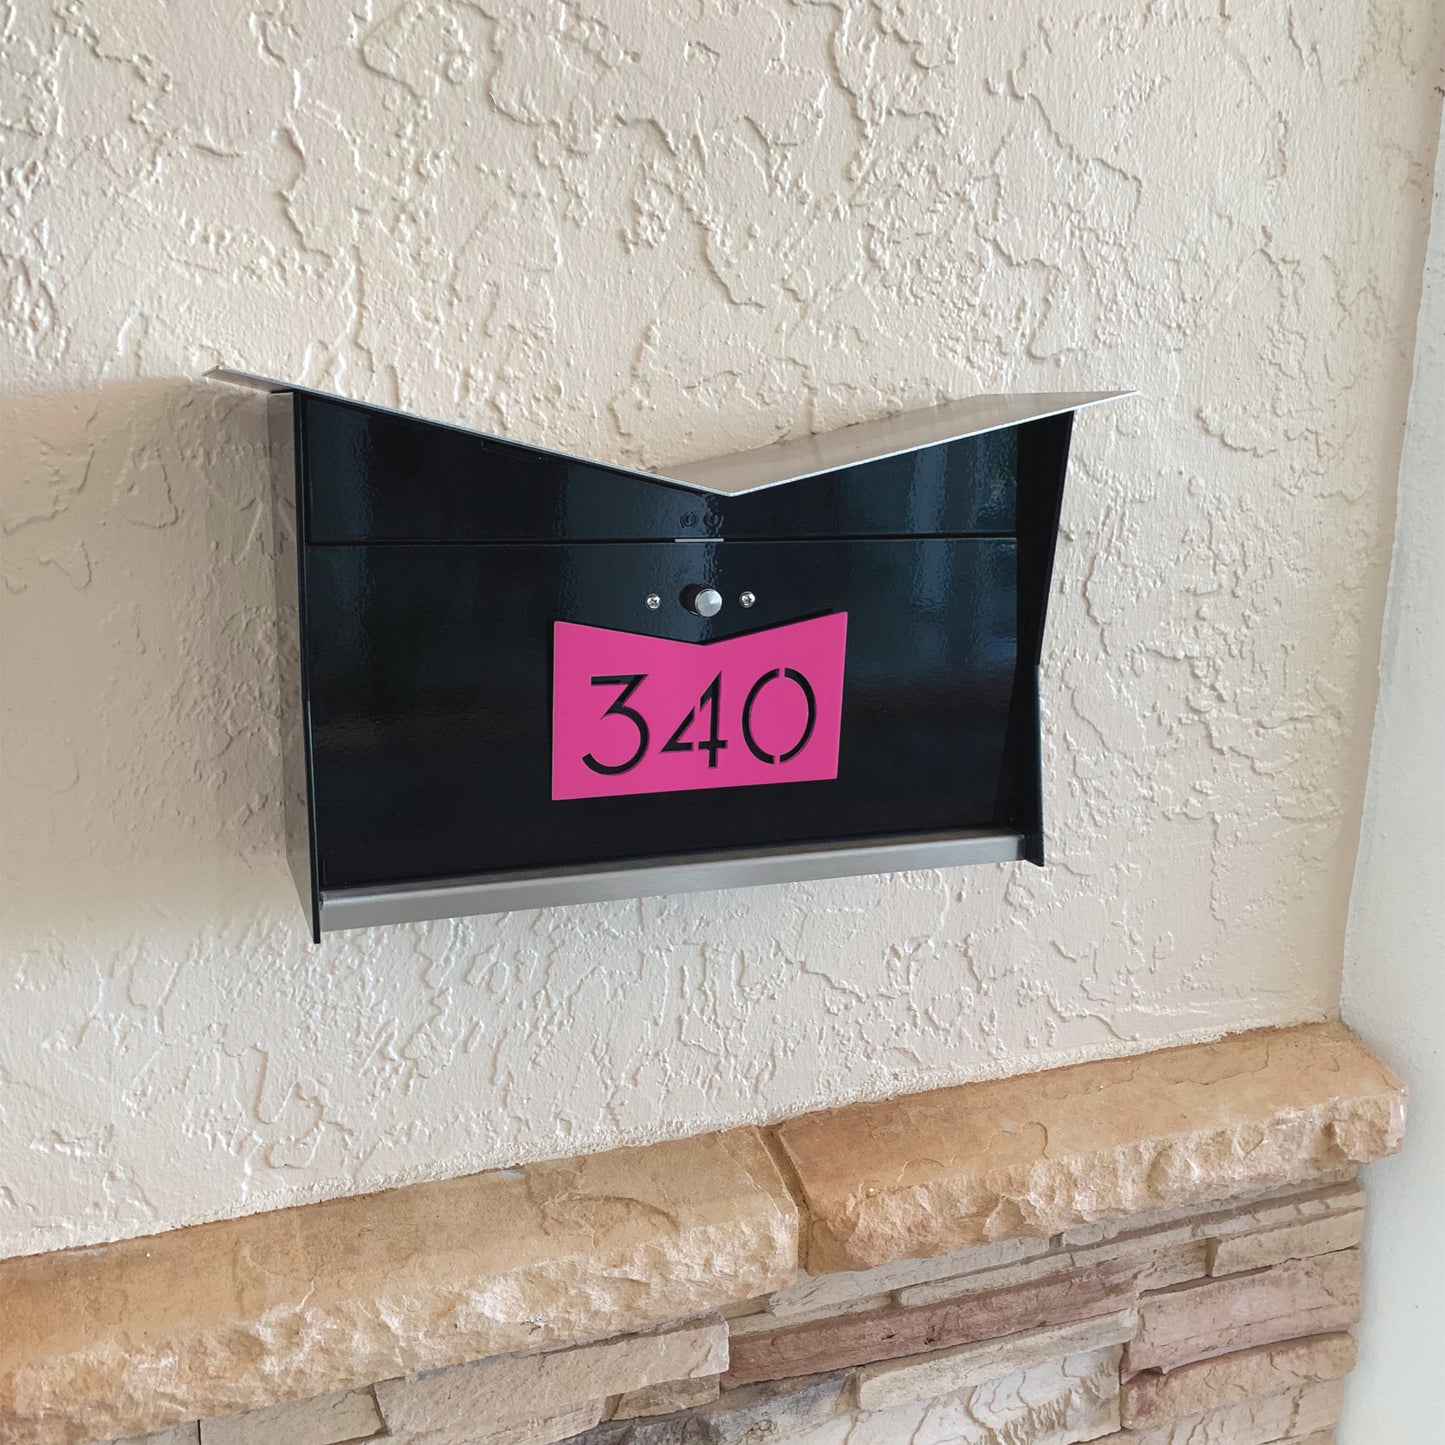 Wall Mount Mailbox mounted to outdoor wall. ButterFly Box in jet black and neon pink